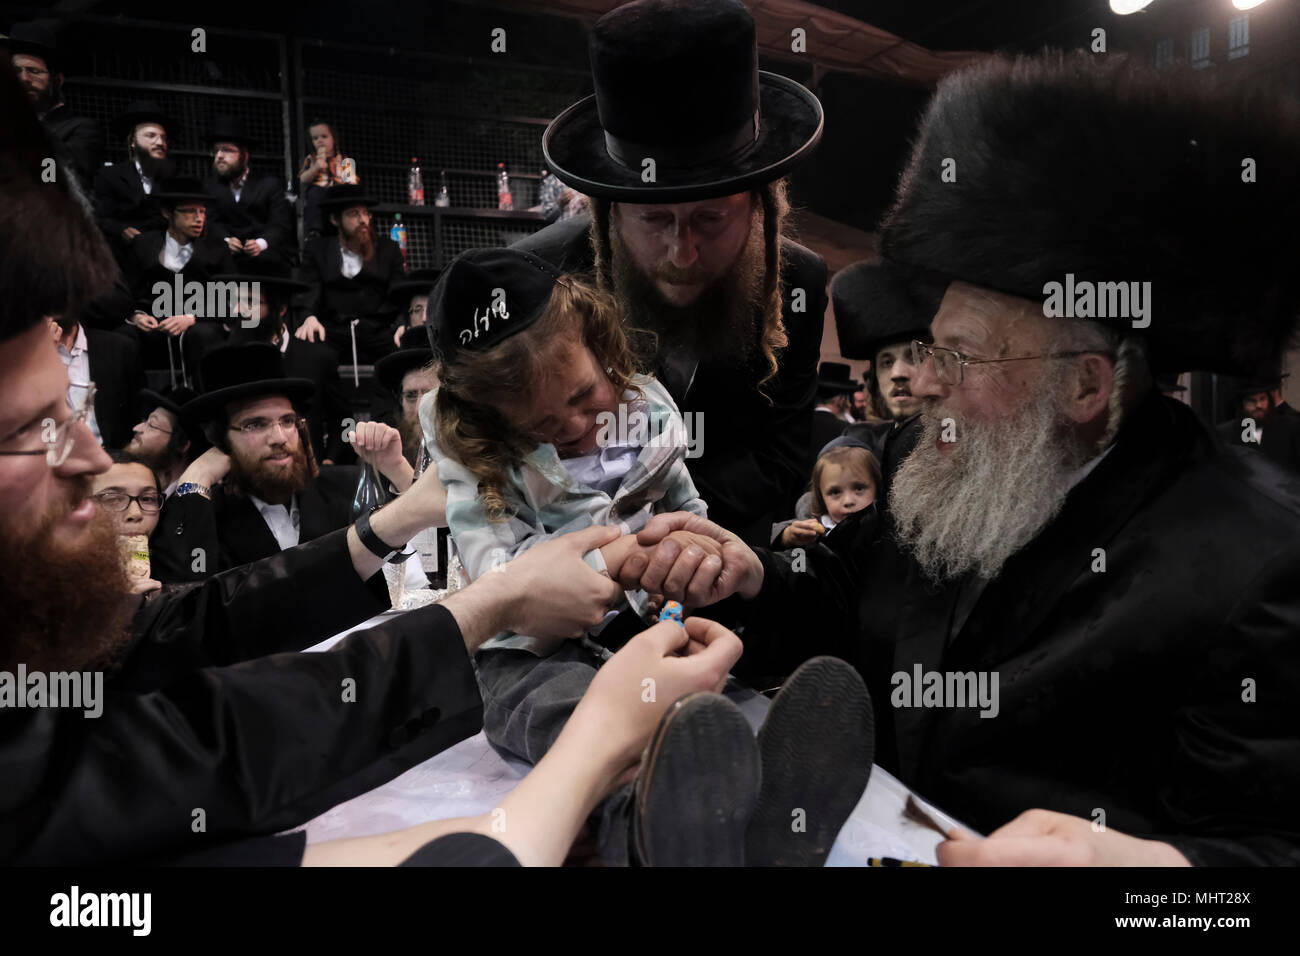 A three-year old Jewish boy takes part in the traditional Halake ceremony, a first hair cut from the Rabbi of the Pinsk-Karlin Hassidic dynasty in Geula religious neighborhood during the celebration of Lag BaOmer holiday which marks the celebration, interpreted by some as anniversary of death of Rabbi Shimon bar Yochai, one of Judaism's great sages some 1800 years ago and the day on which he revealed the deepest secrets of kabbalah a landmark text of Jewish mysticism Stock Photo